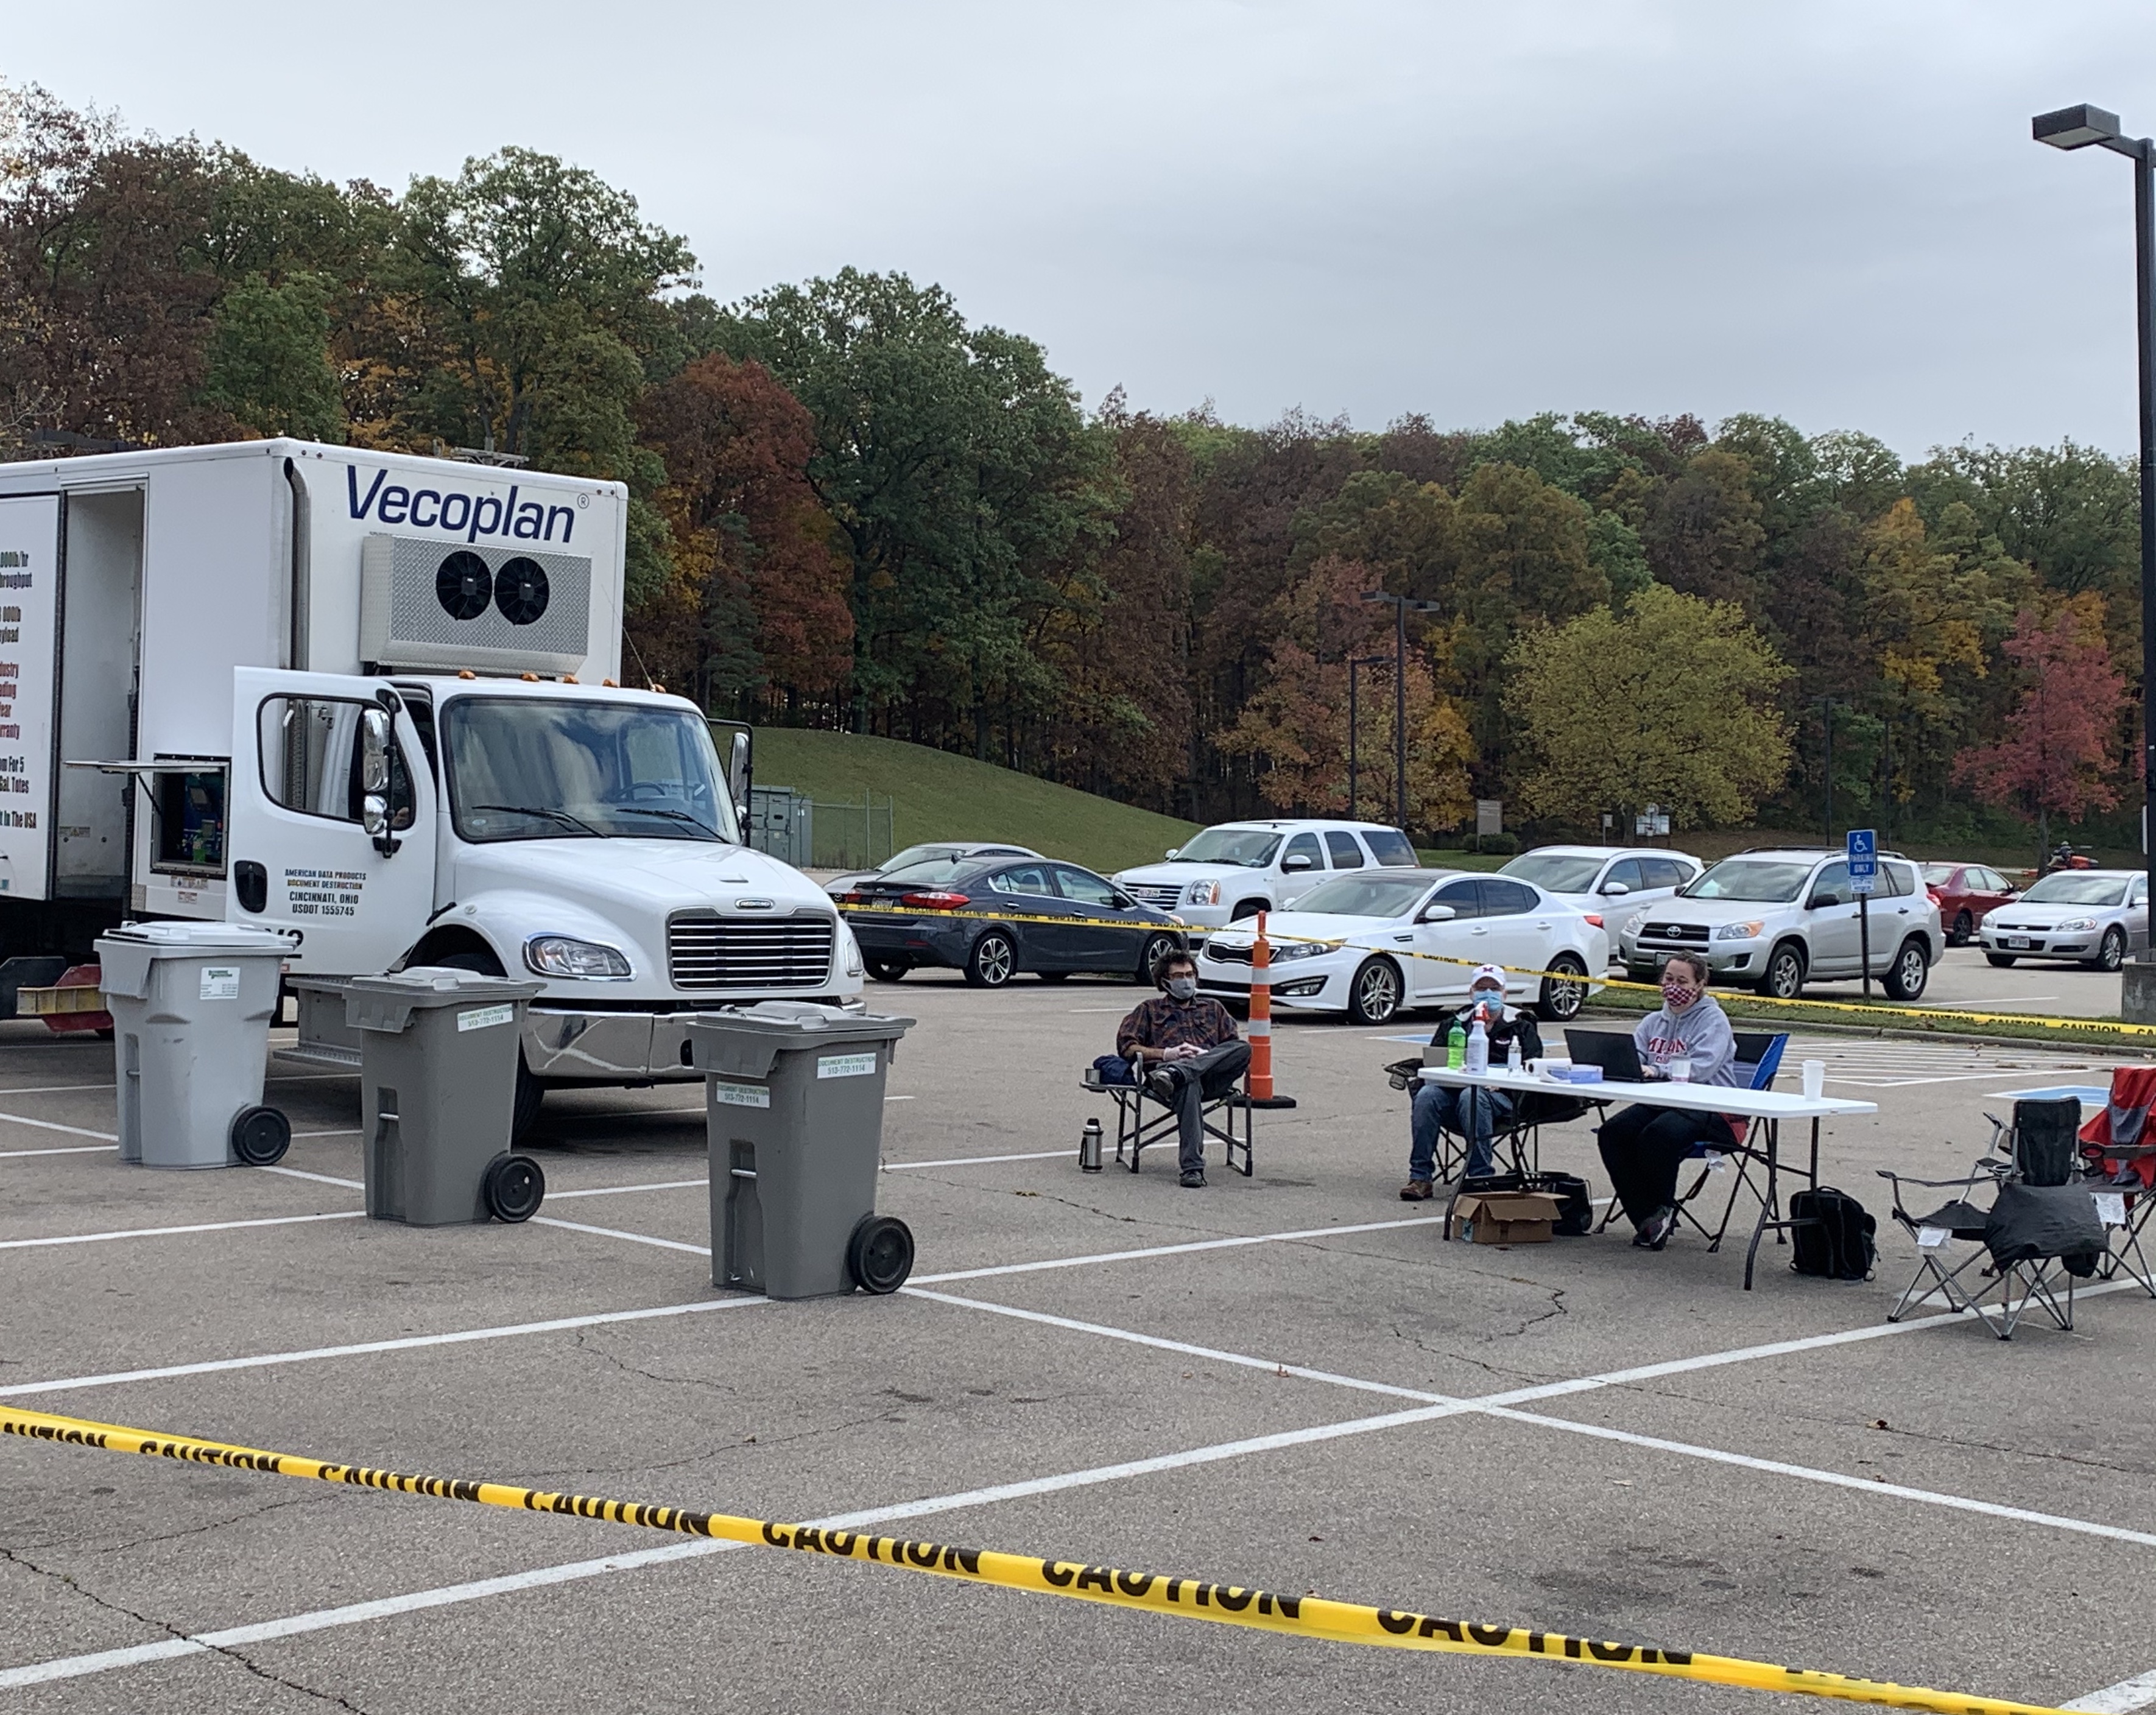 Members of IT Services and General Counsels office working the Shredfest 2020 event at the Middletown campus. Sitting in the parking lot waiting for shred to be dropped off.